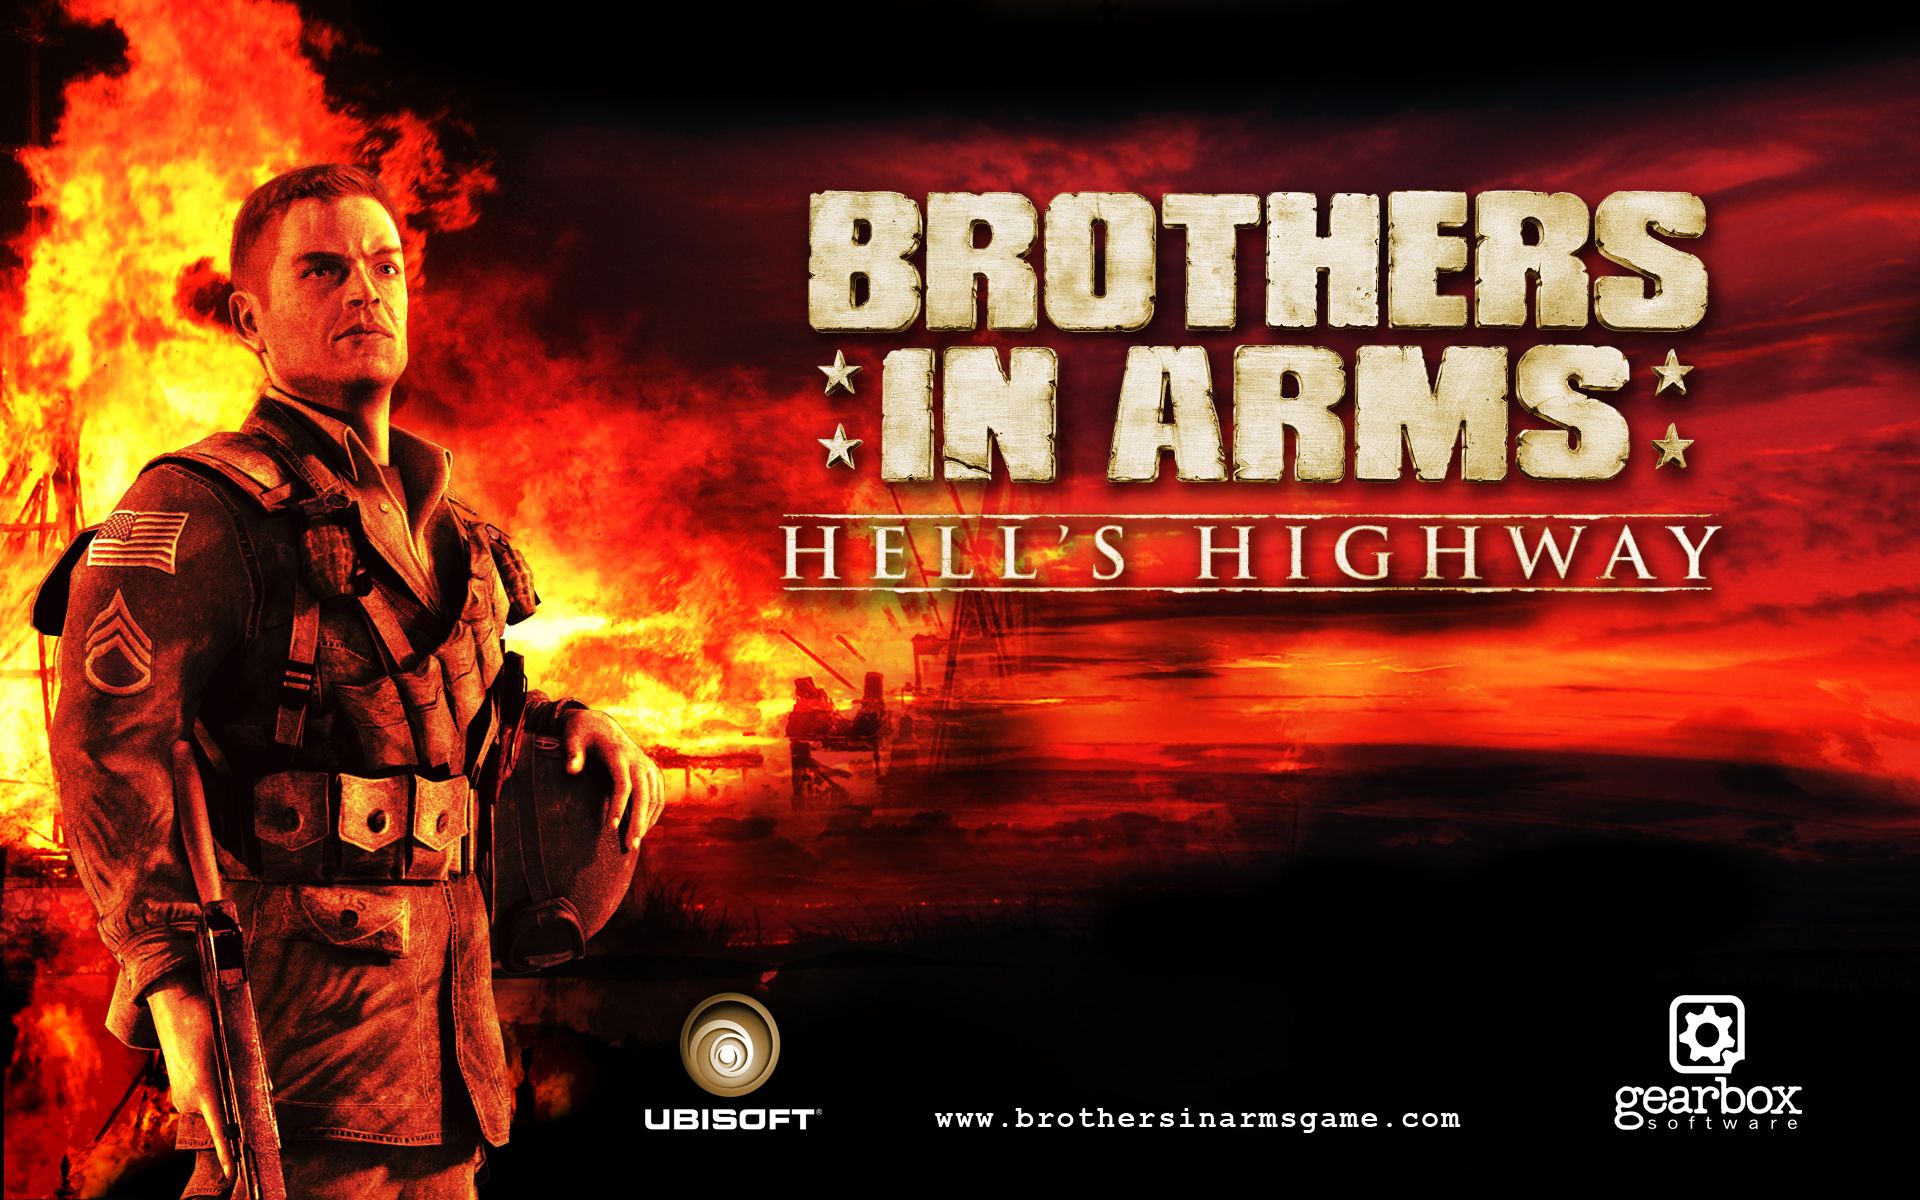 Wallpaper from Brothers in Arms: Hell's Highway